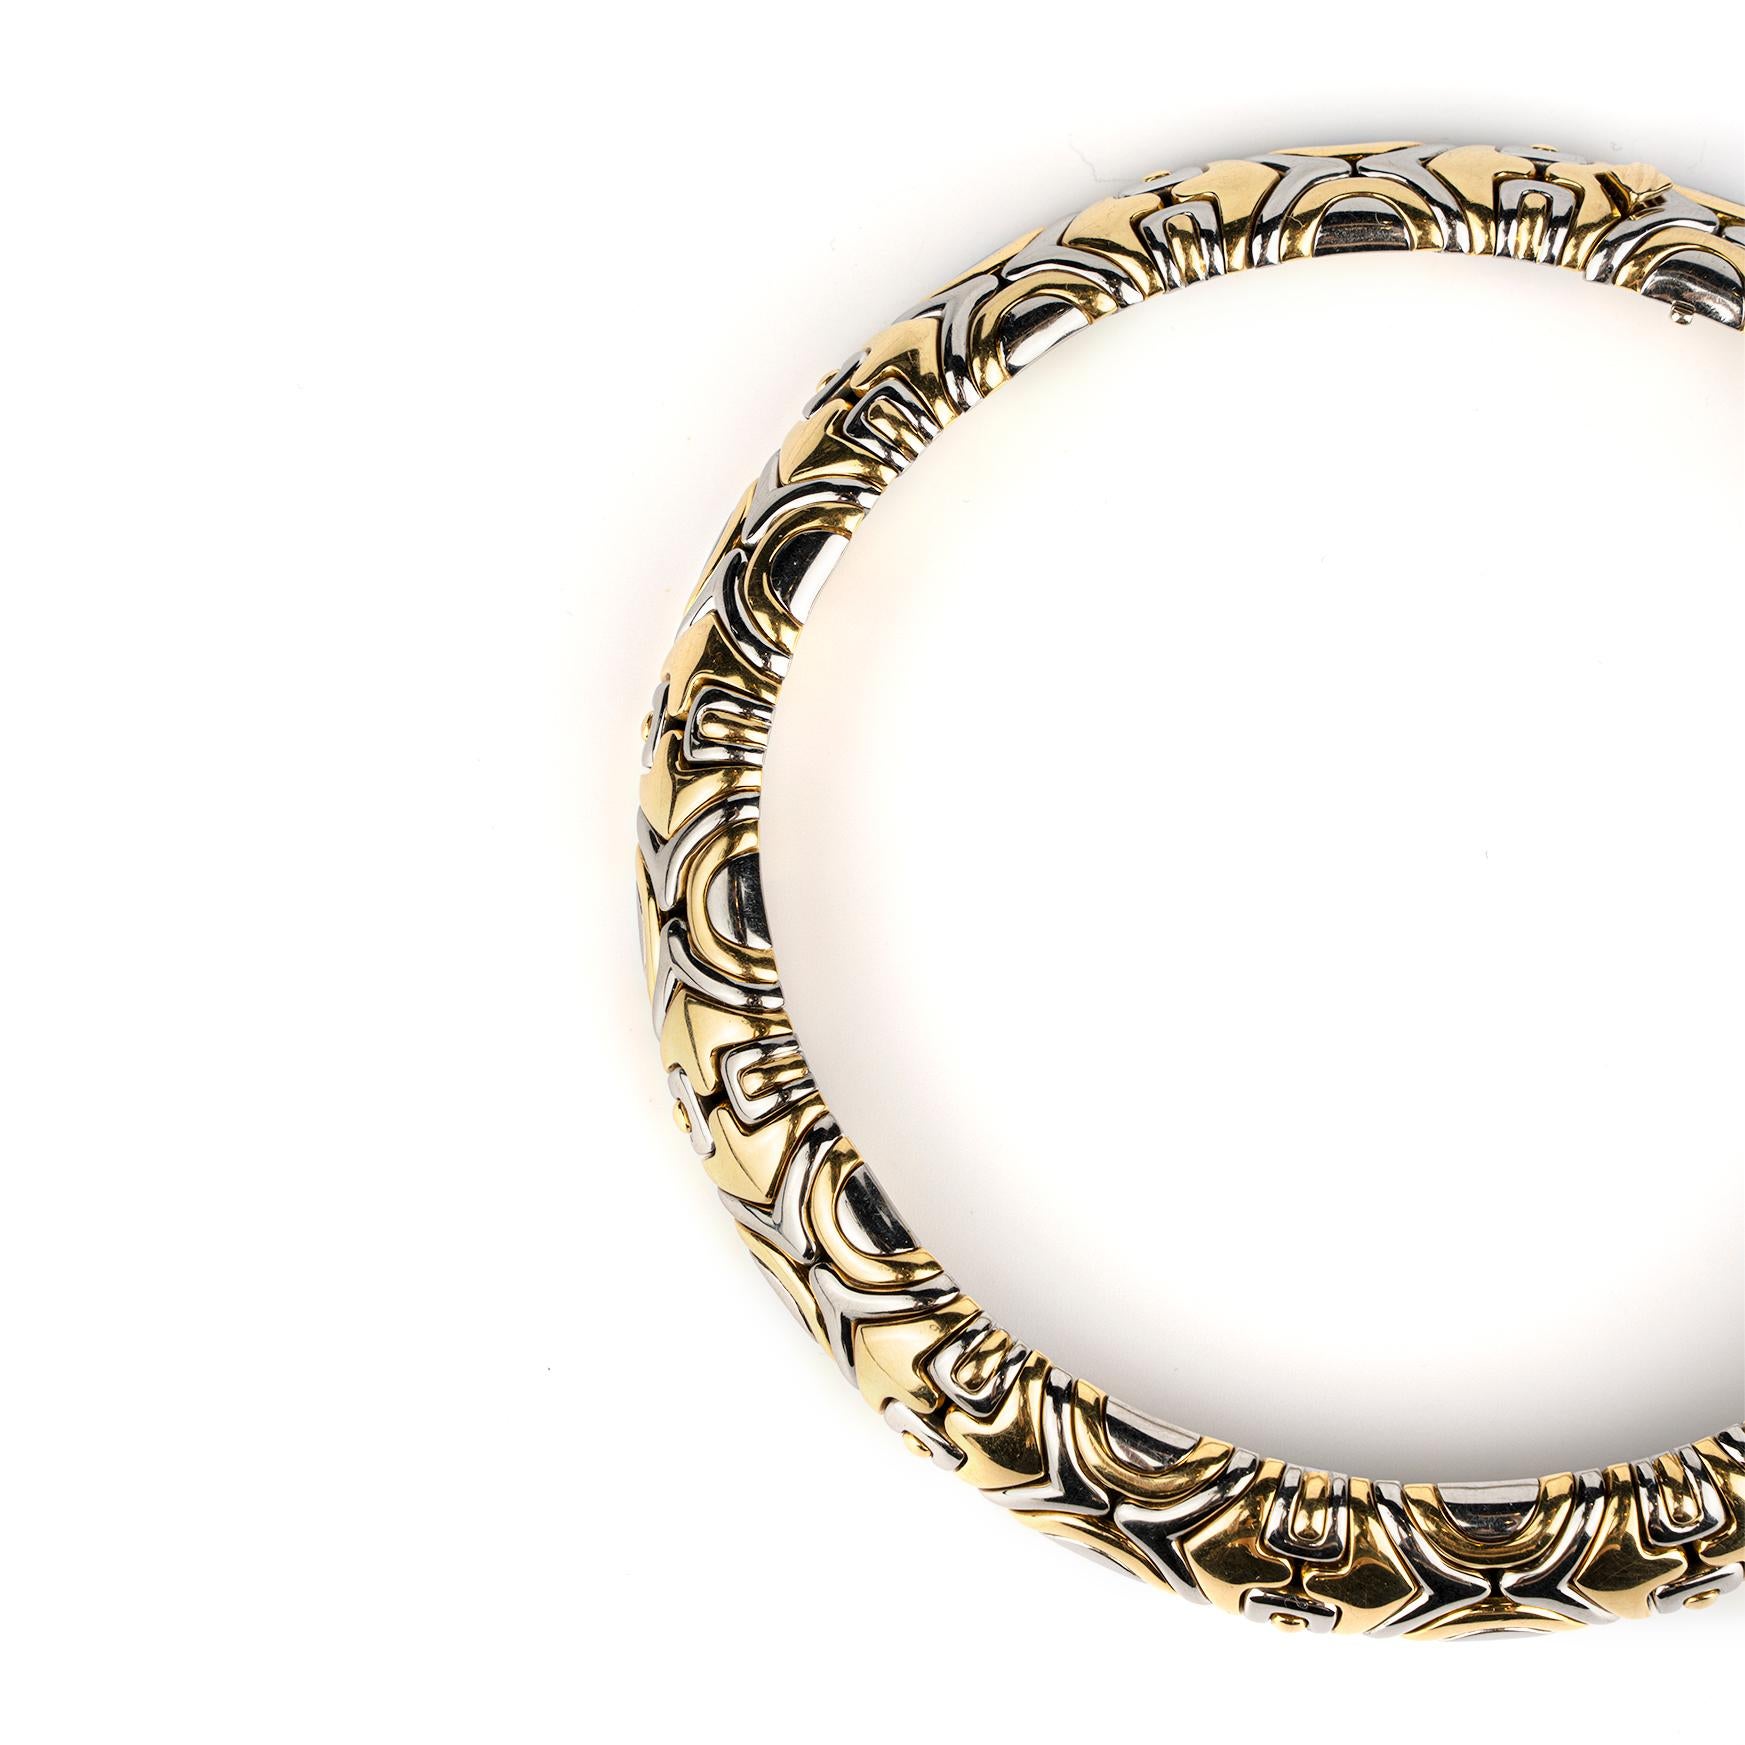 A collectible wide Bvlgari 'Alveare' necklace in 18k gold and stainless steel. Made in Italy, circa 1980.